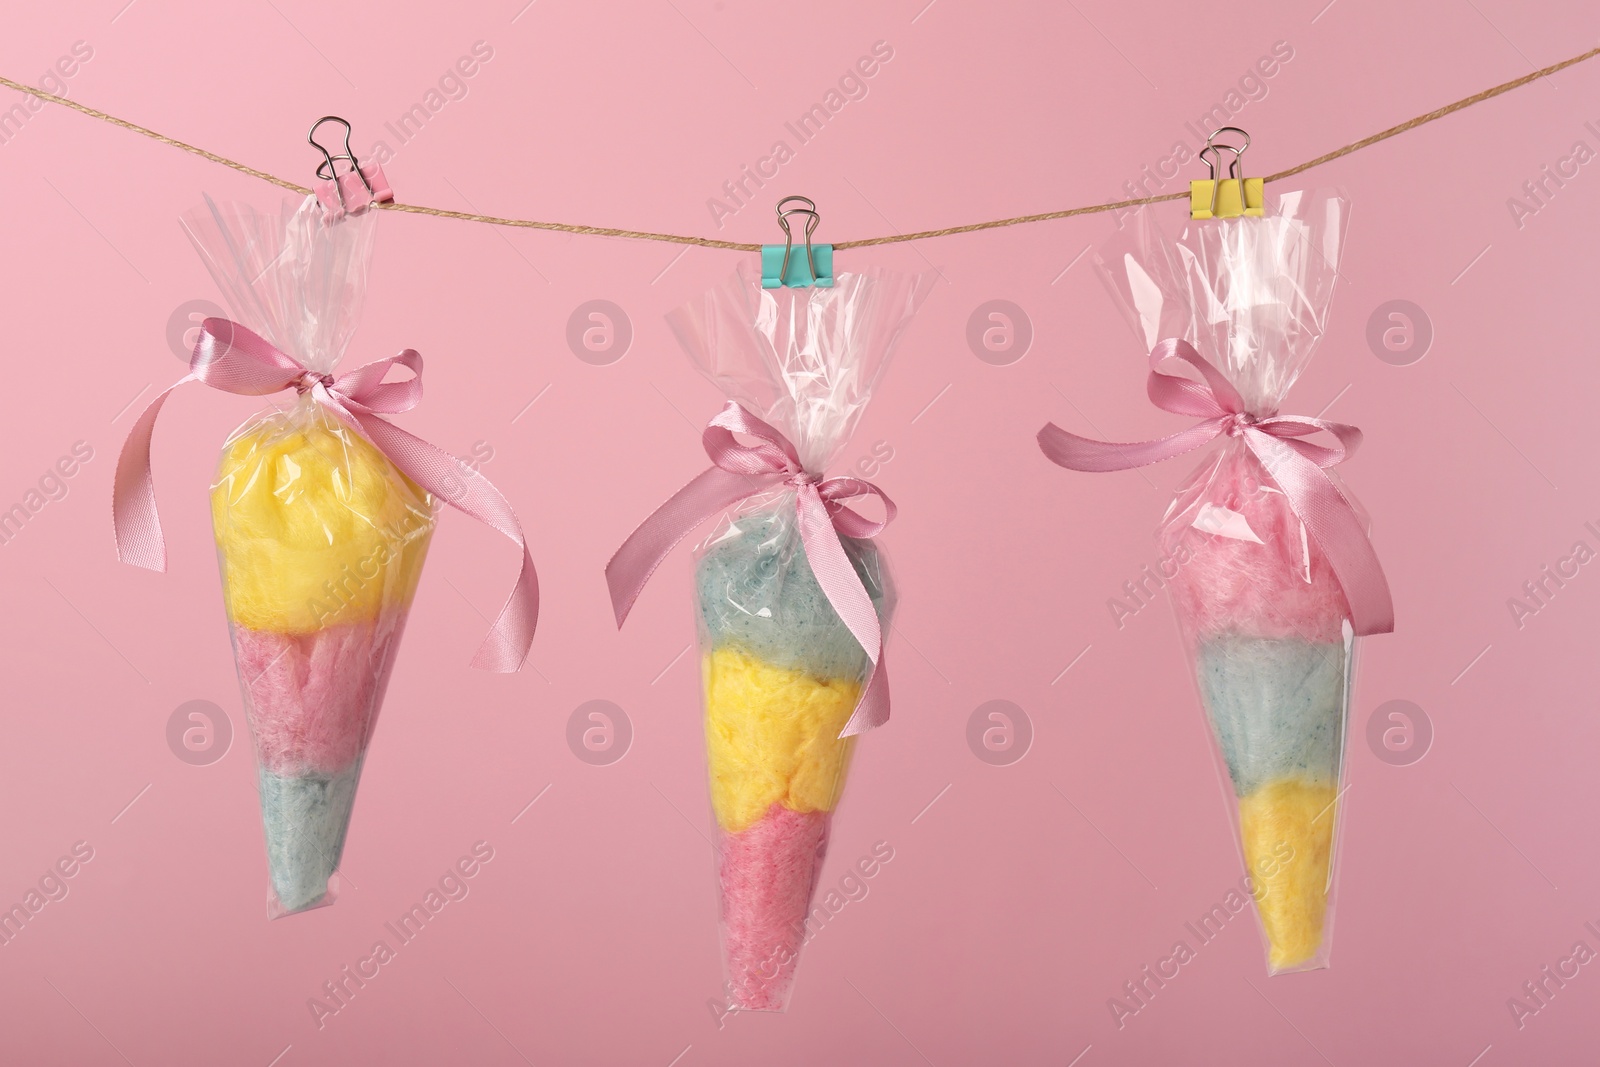 Photo of Packaged sweet cotton candies hanging on clothesline against pink background